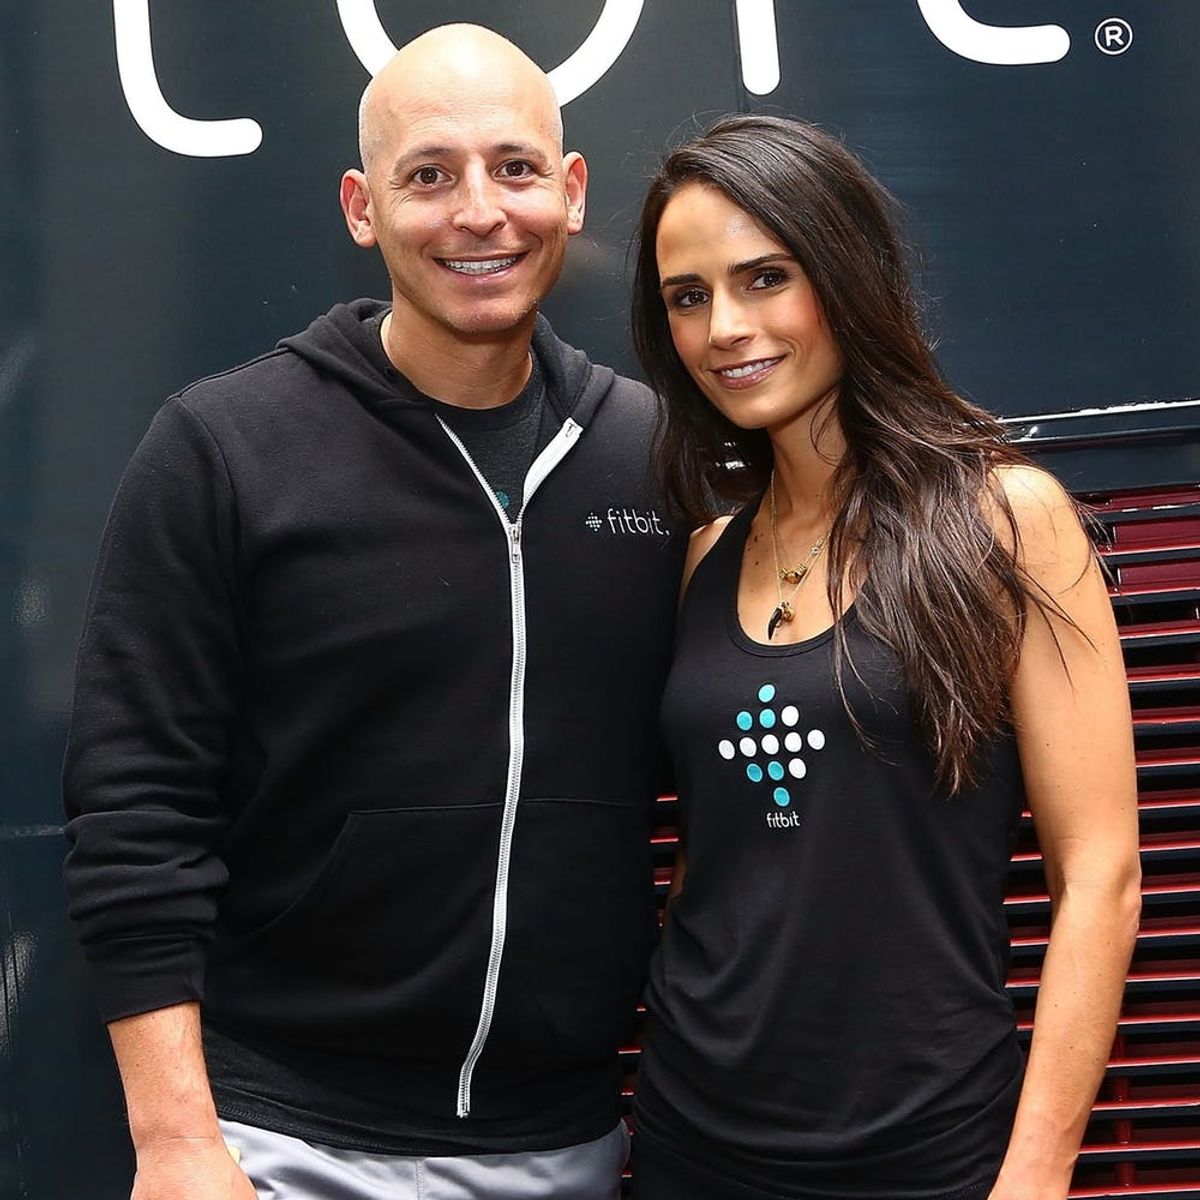 Celeb Trainer Harley Pasternak Shares the Weirdest Body Part He’s Had to Train